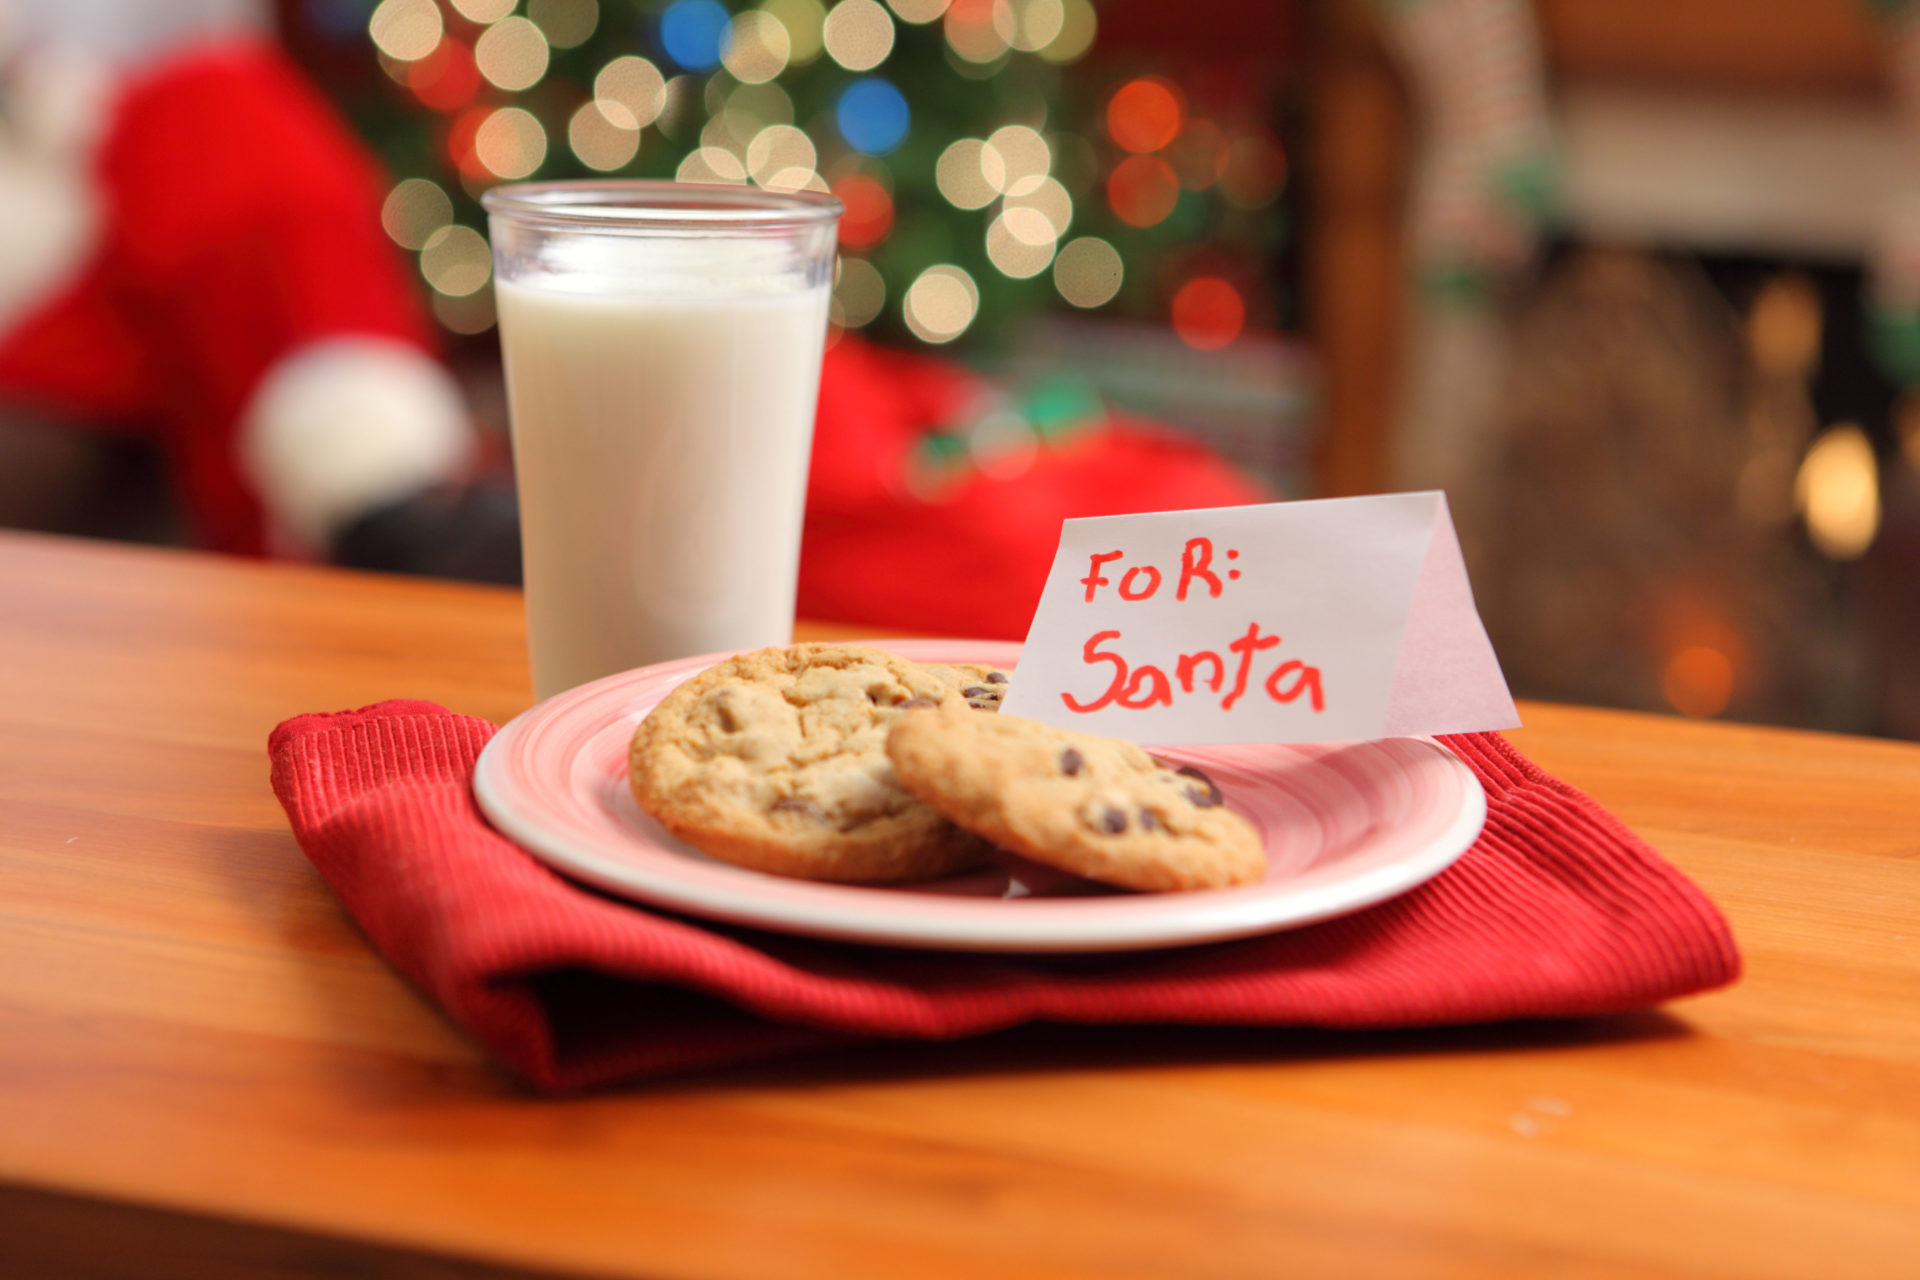 Milk and cookies for Santa Claus. Image: D. Hurst / Alamy Stock Photo 